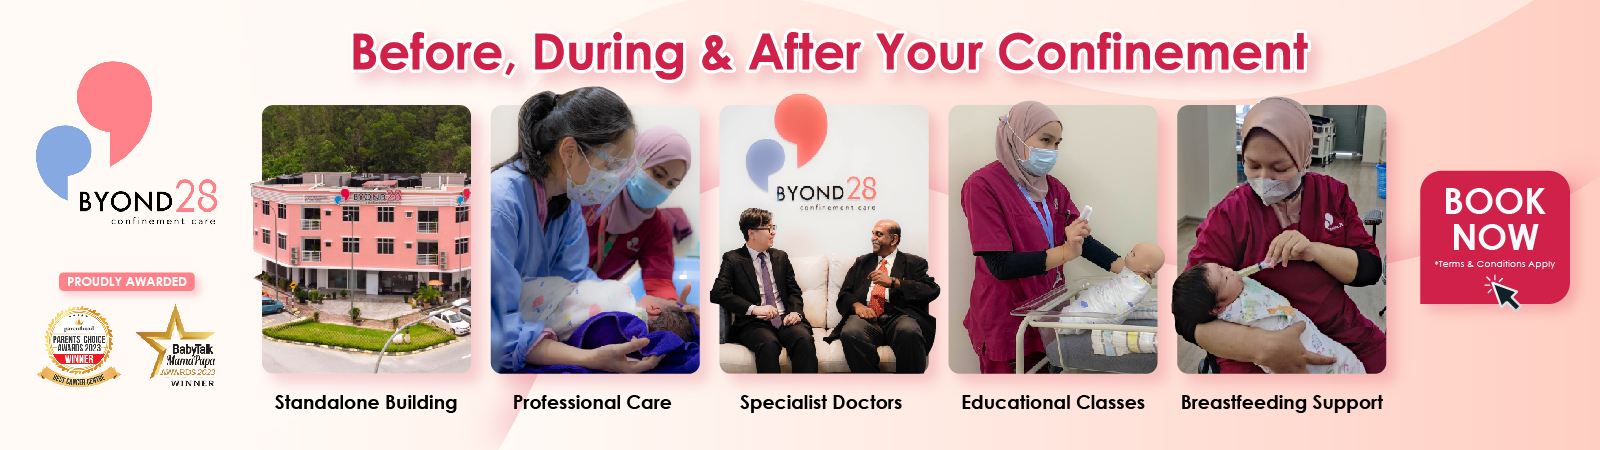 Byond28 Confinement Care: The Choice of Today’s Savvy New Moms